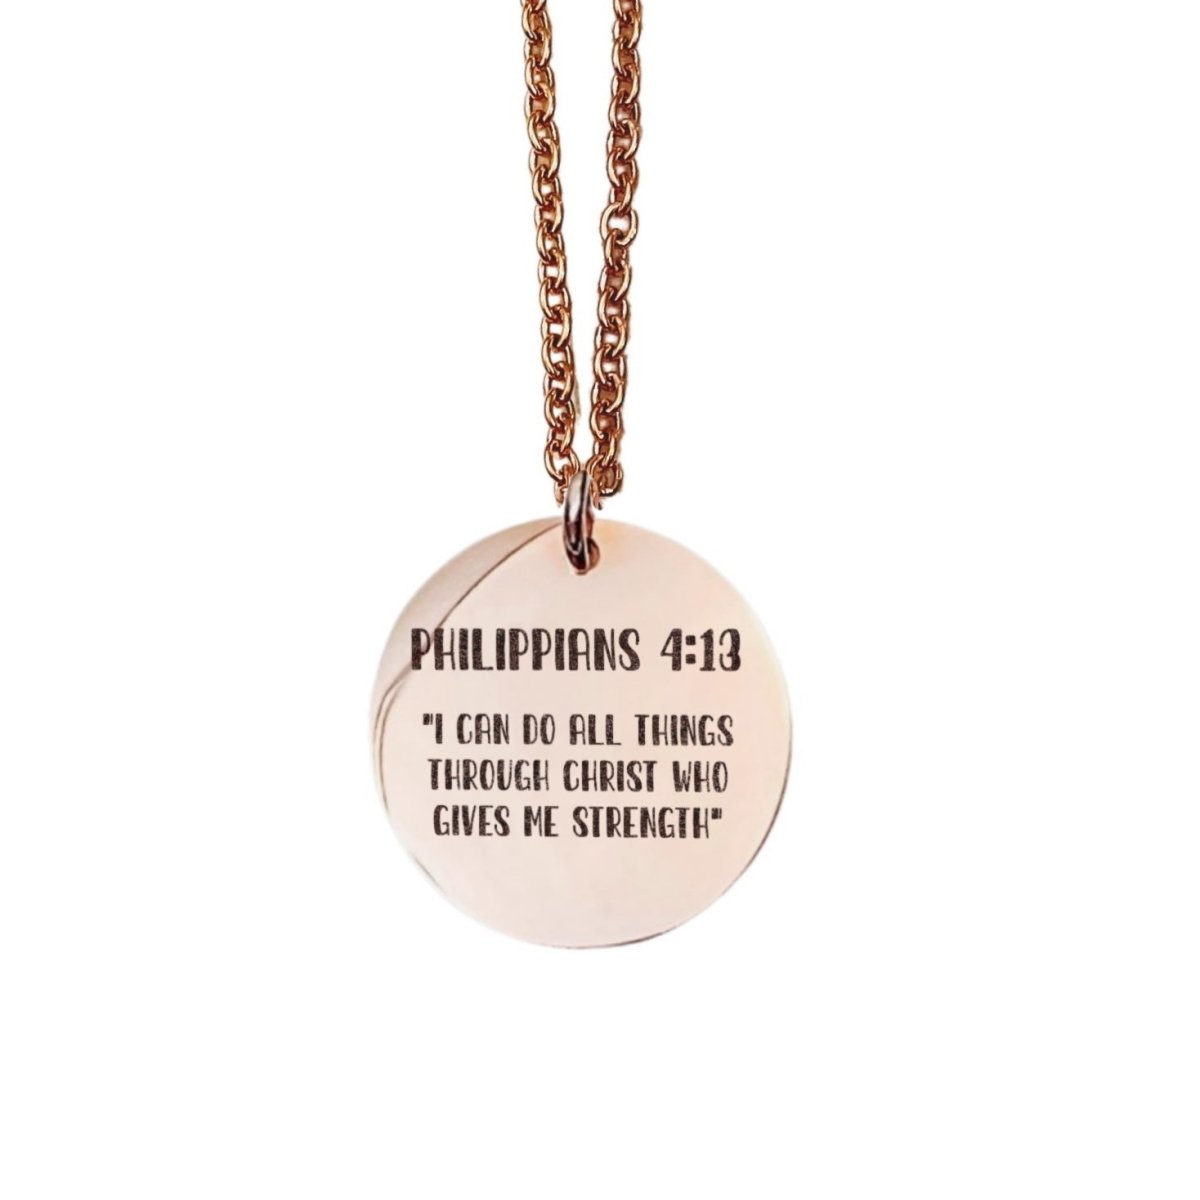 BIBLE VERSE NECKLACE - Avy + Tay